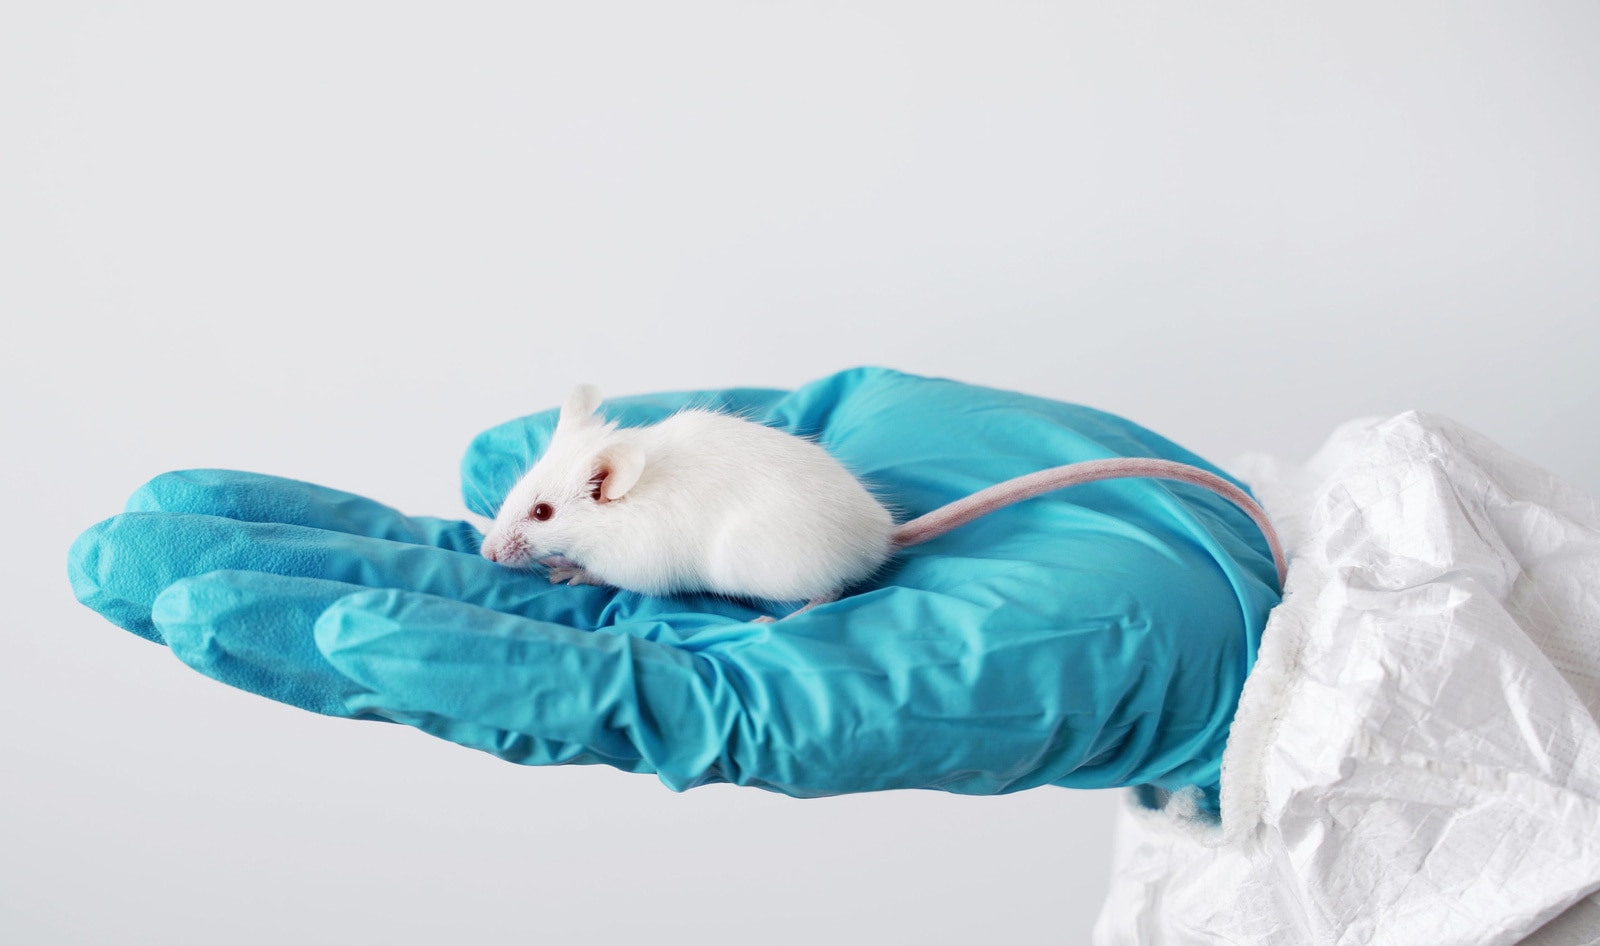 Maryland Set to Become Fifth State to Ban Cosmetic Animal Testing